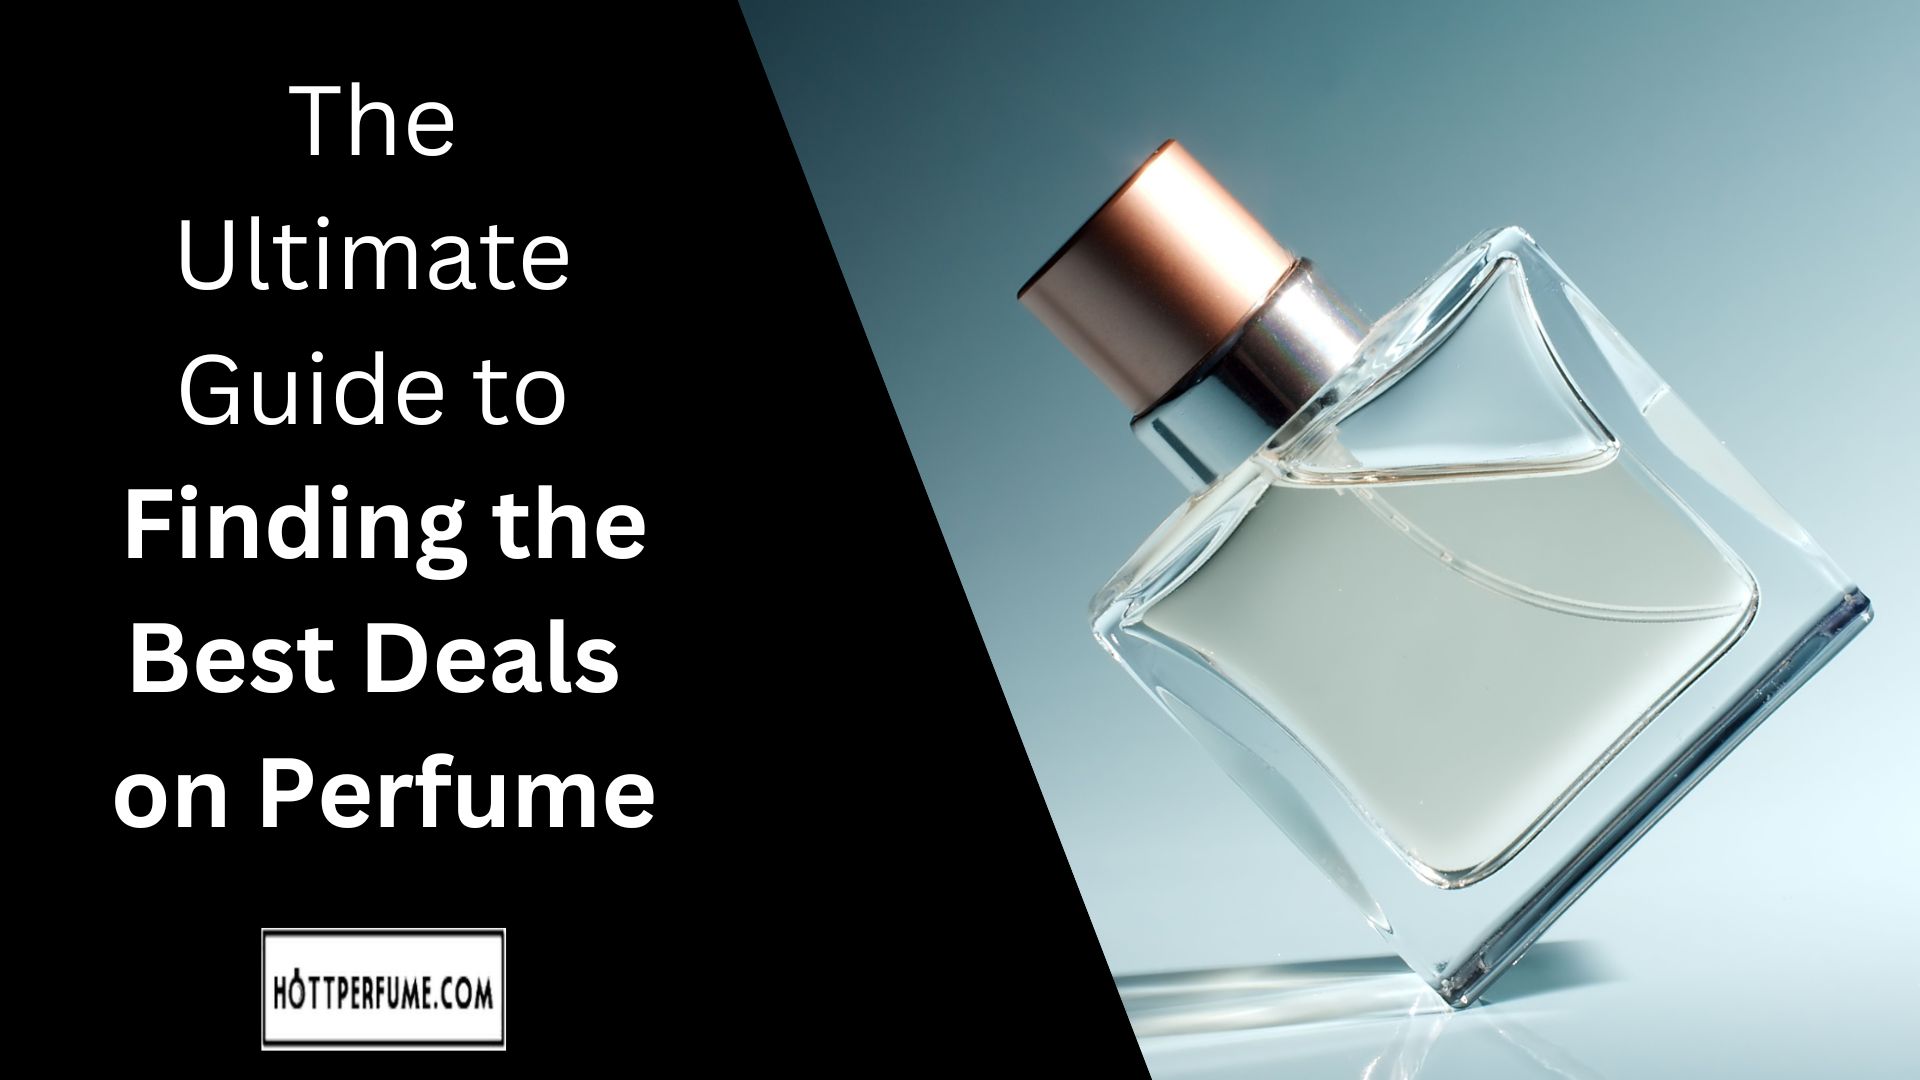 The Ultimate Guide to Finding the Best Deals on Perfume